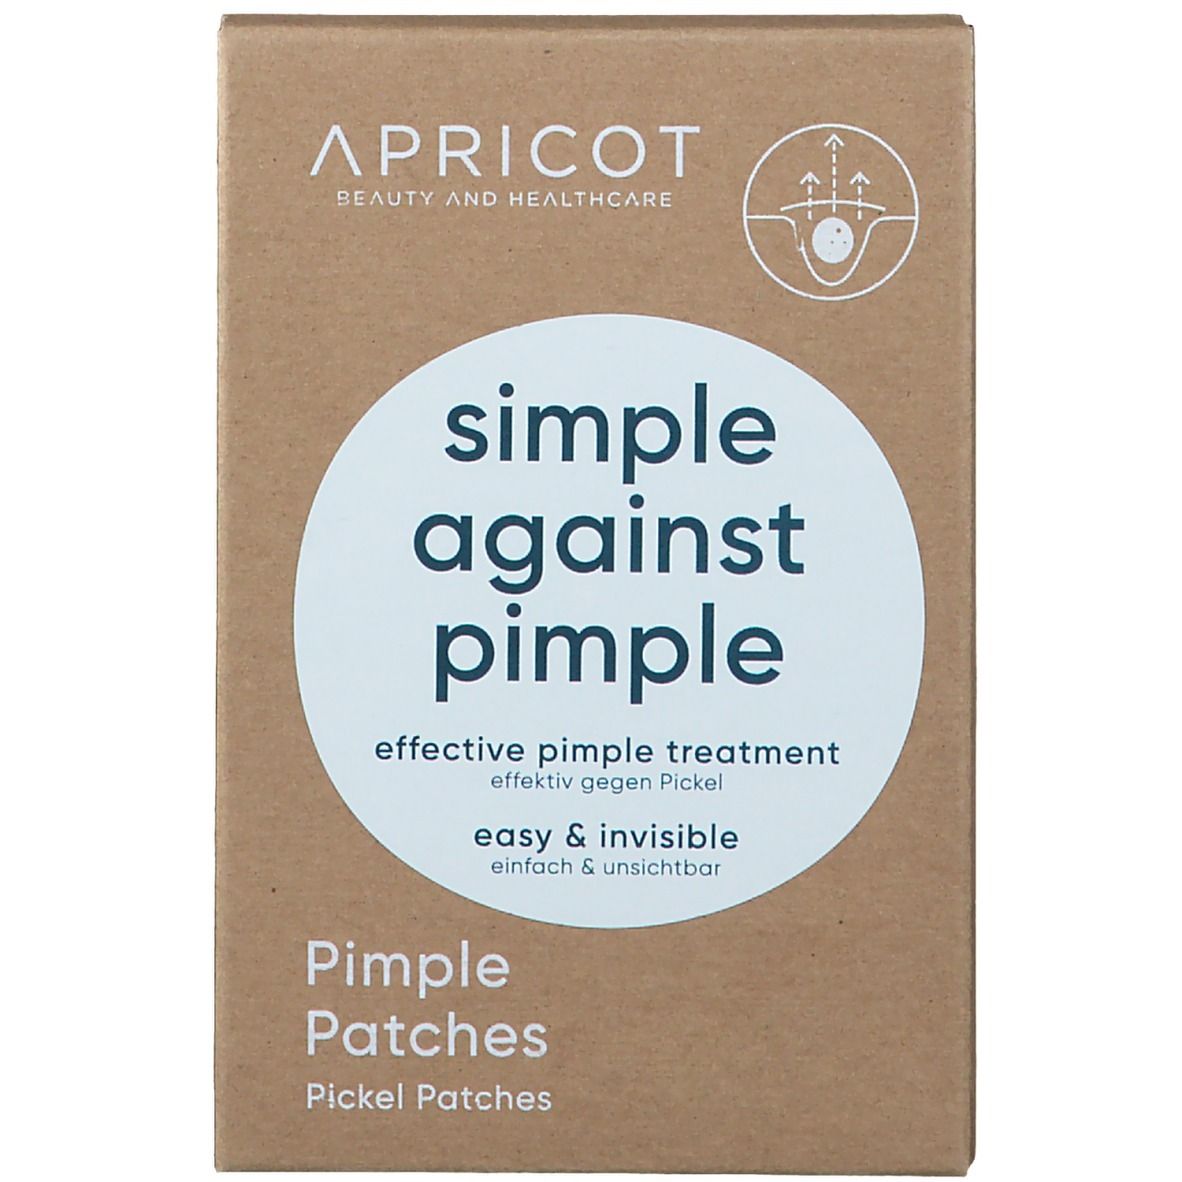 APRICOT Anti-Pickel Patches